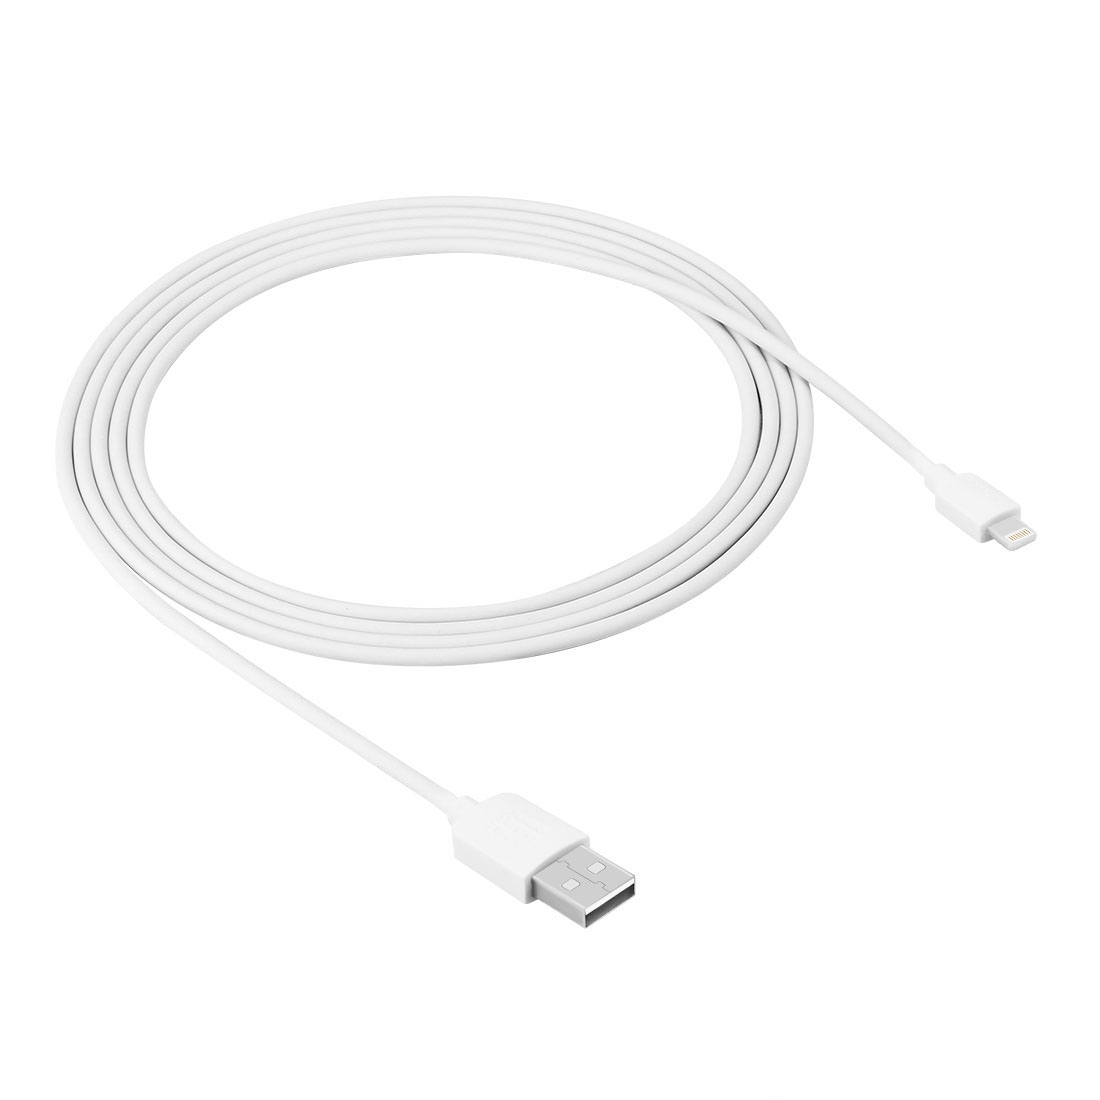 Cable USB iPhone lightning chargeur 3 mètres